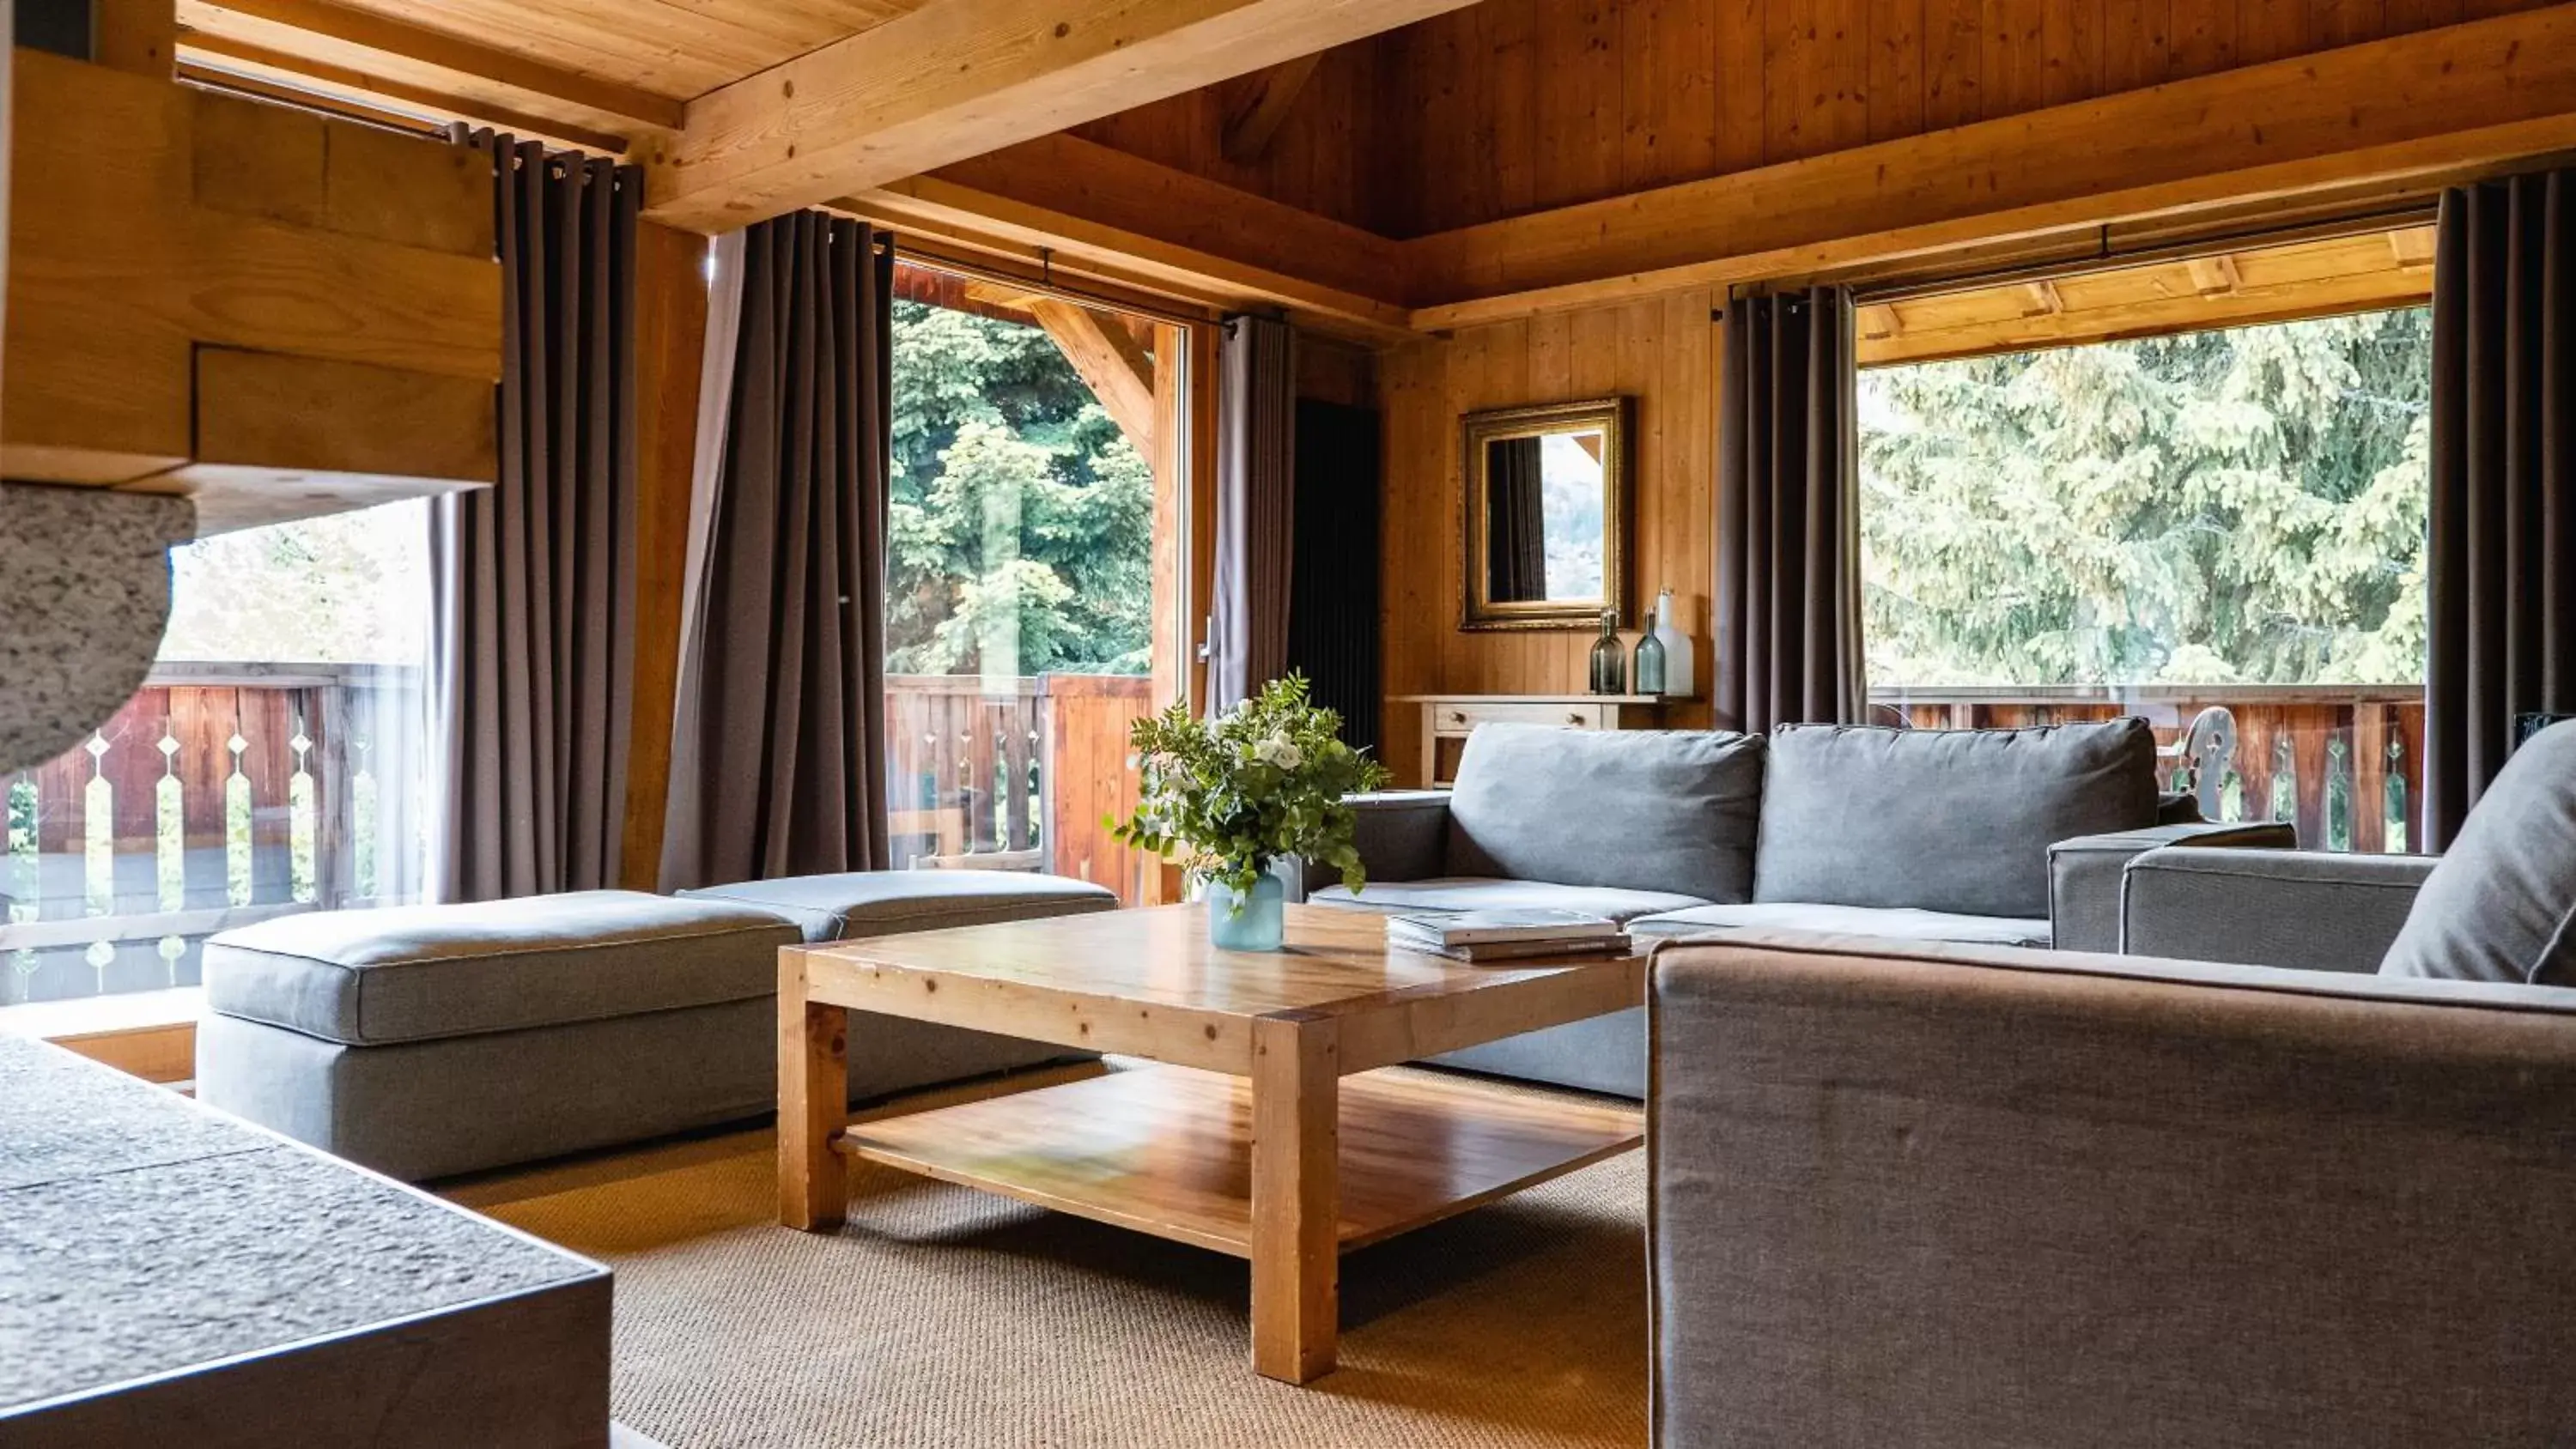 Four-Bedroom Chalet - Clovis in L'Alpaga, a Beaumier hotel